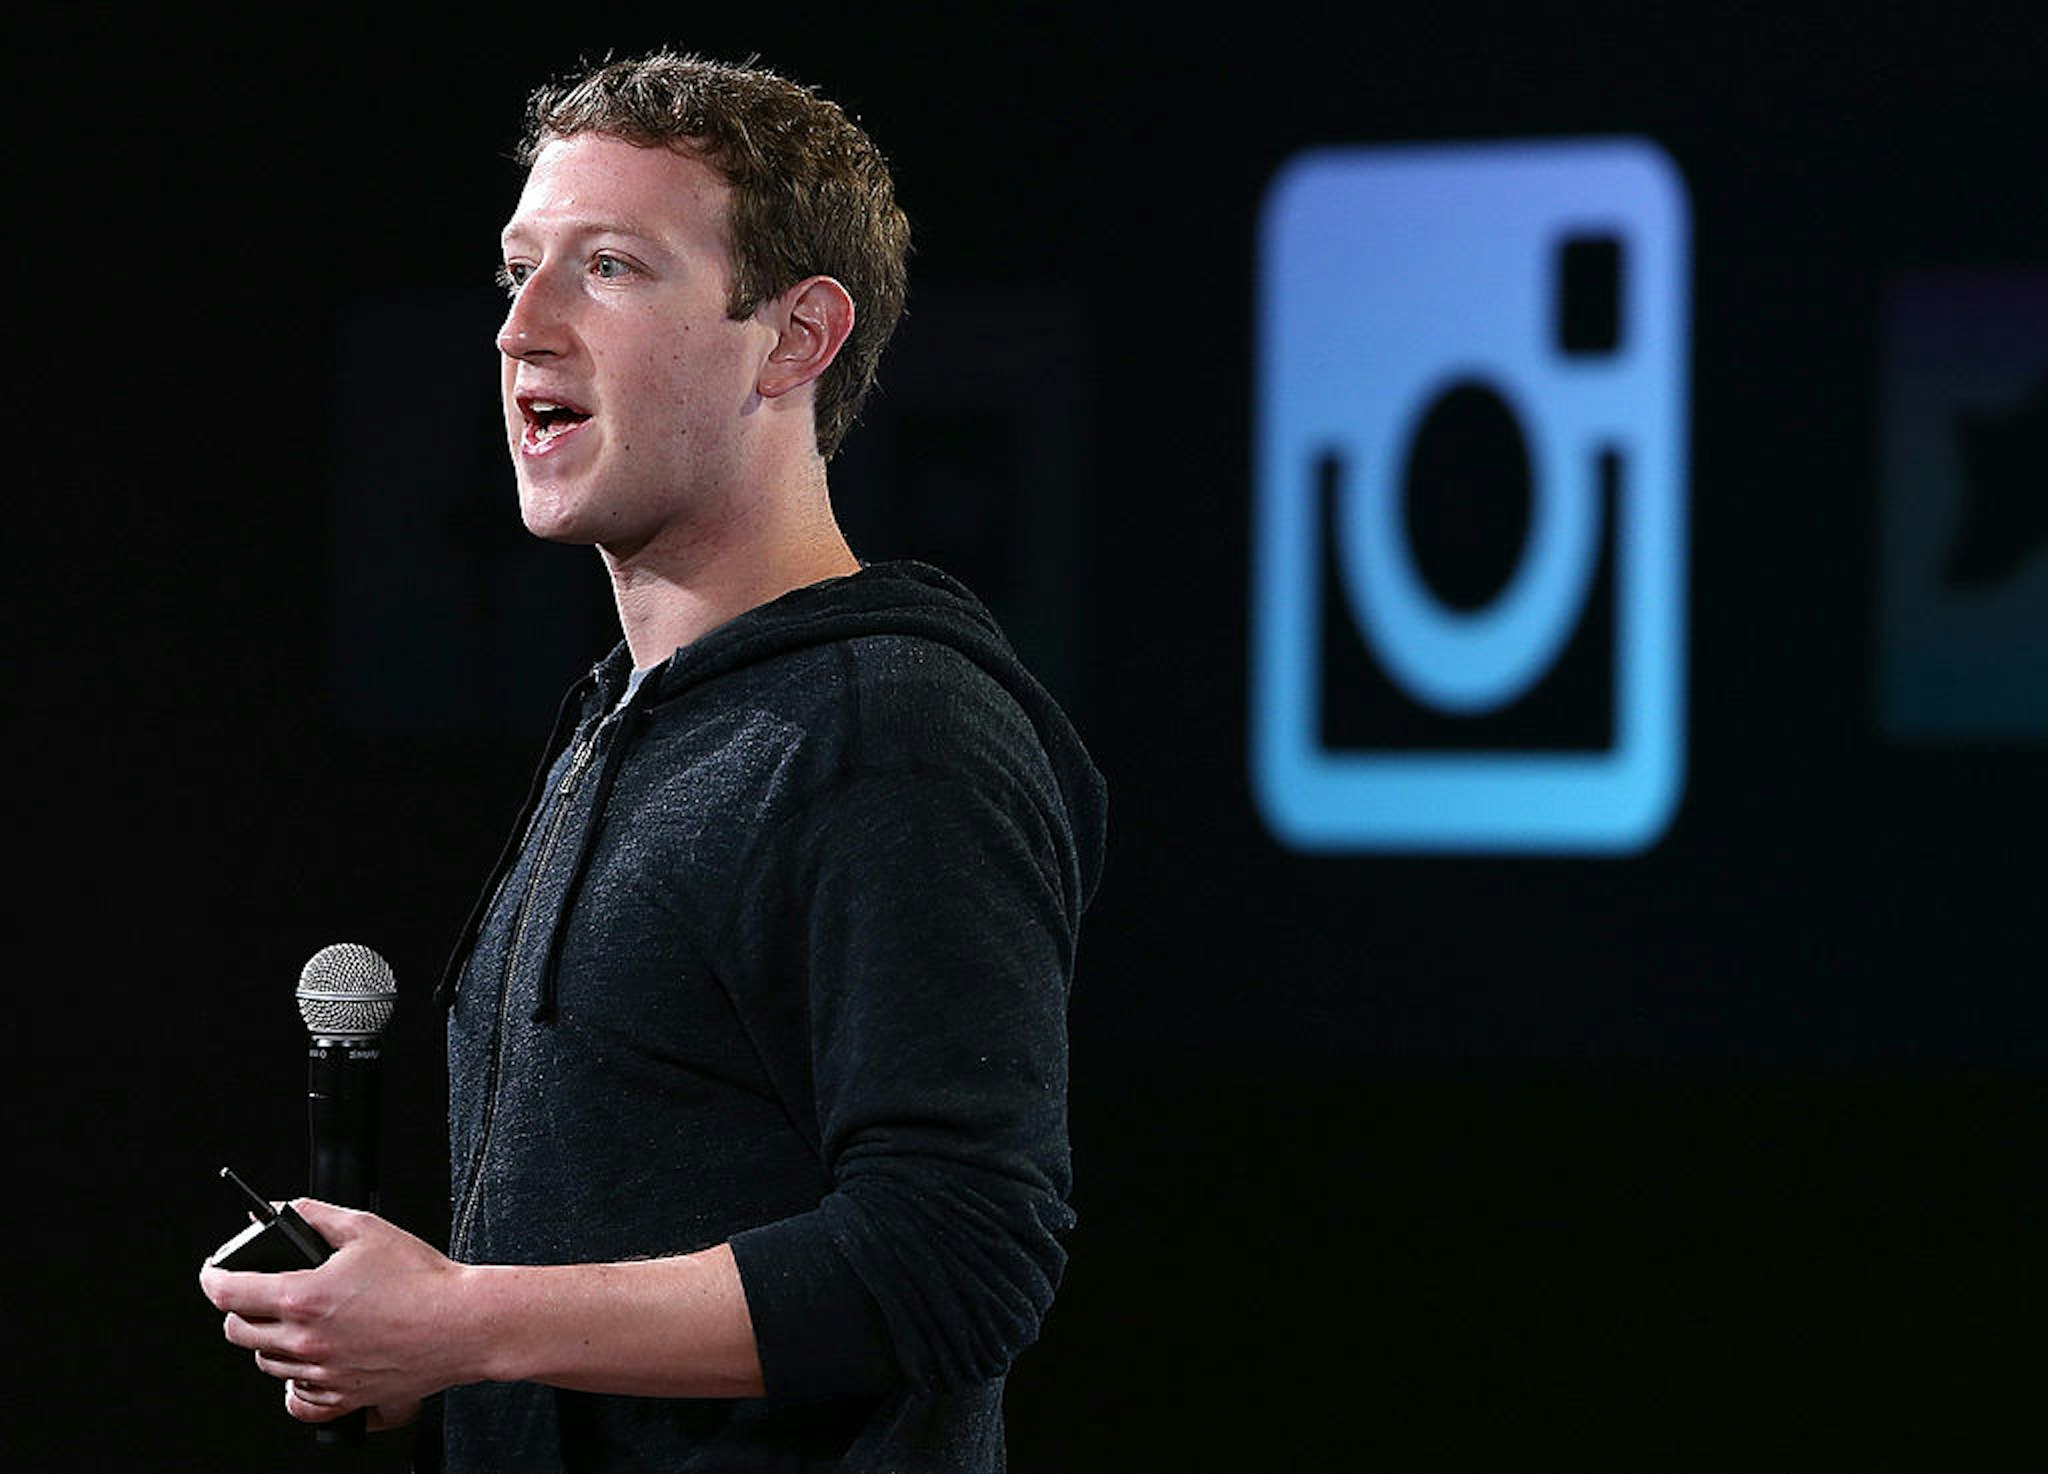 MENLO PARK, CA - JUNE 20: Facebook CEO Mark Zuckerberg speaks during a press event at Facebook headquarters on June 20, 2013 in Menlo Park, California. Facebook announced that its photo-sharing subsidiary Instagram will now allow users to take and share video. (Photo by Justin Sullivan/Getty Images)